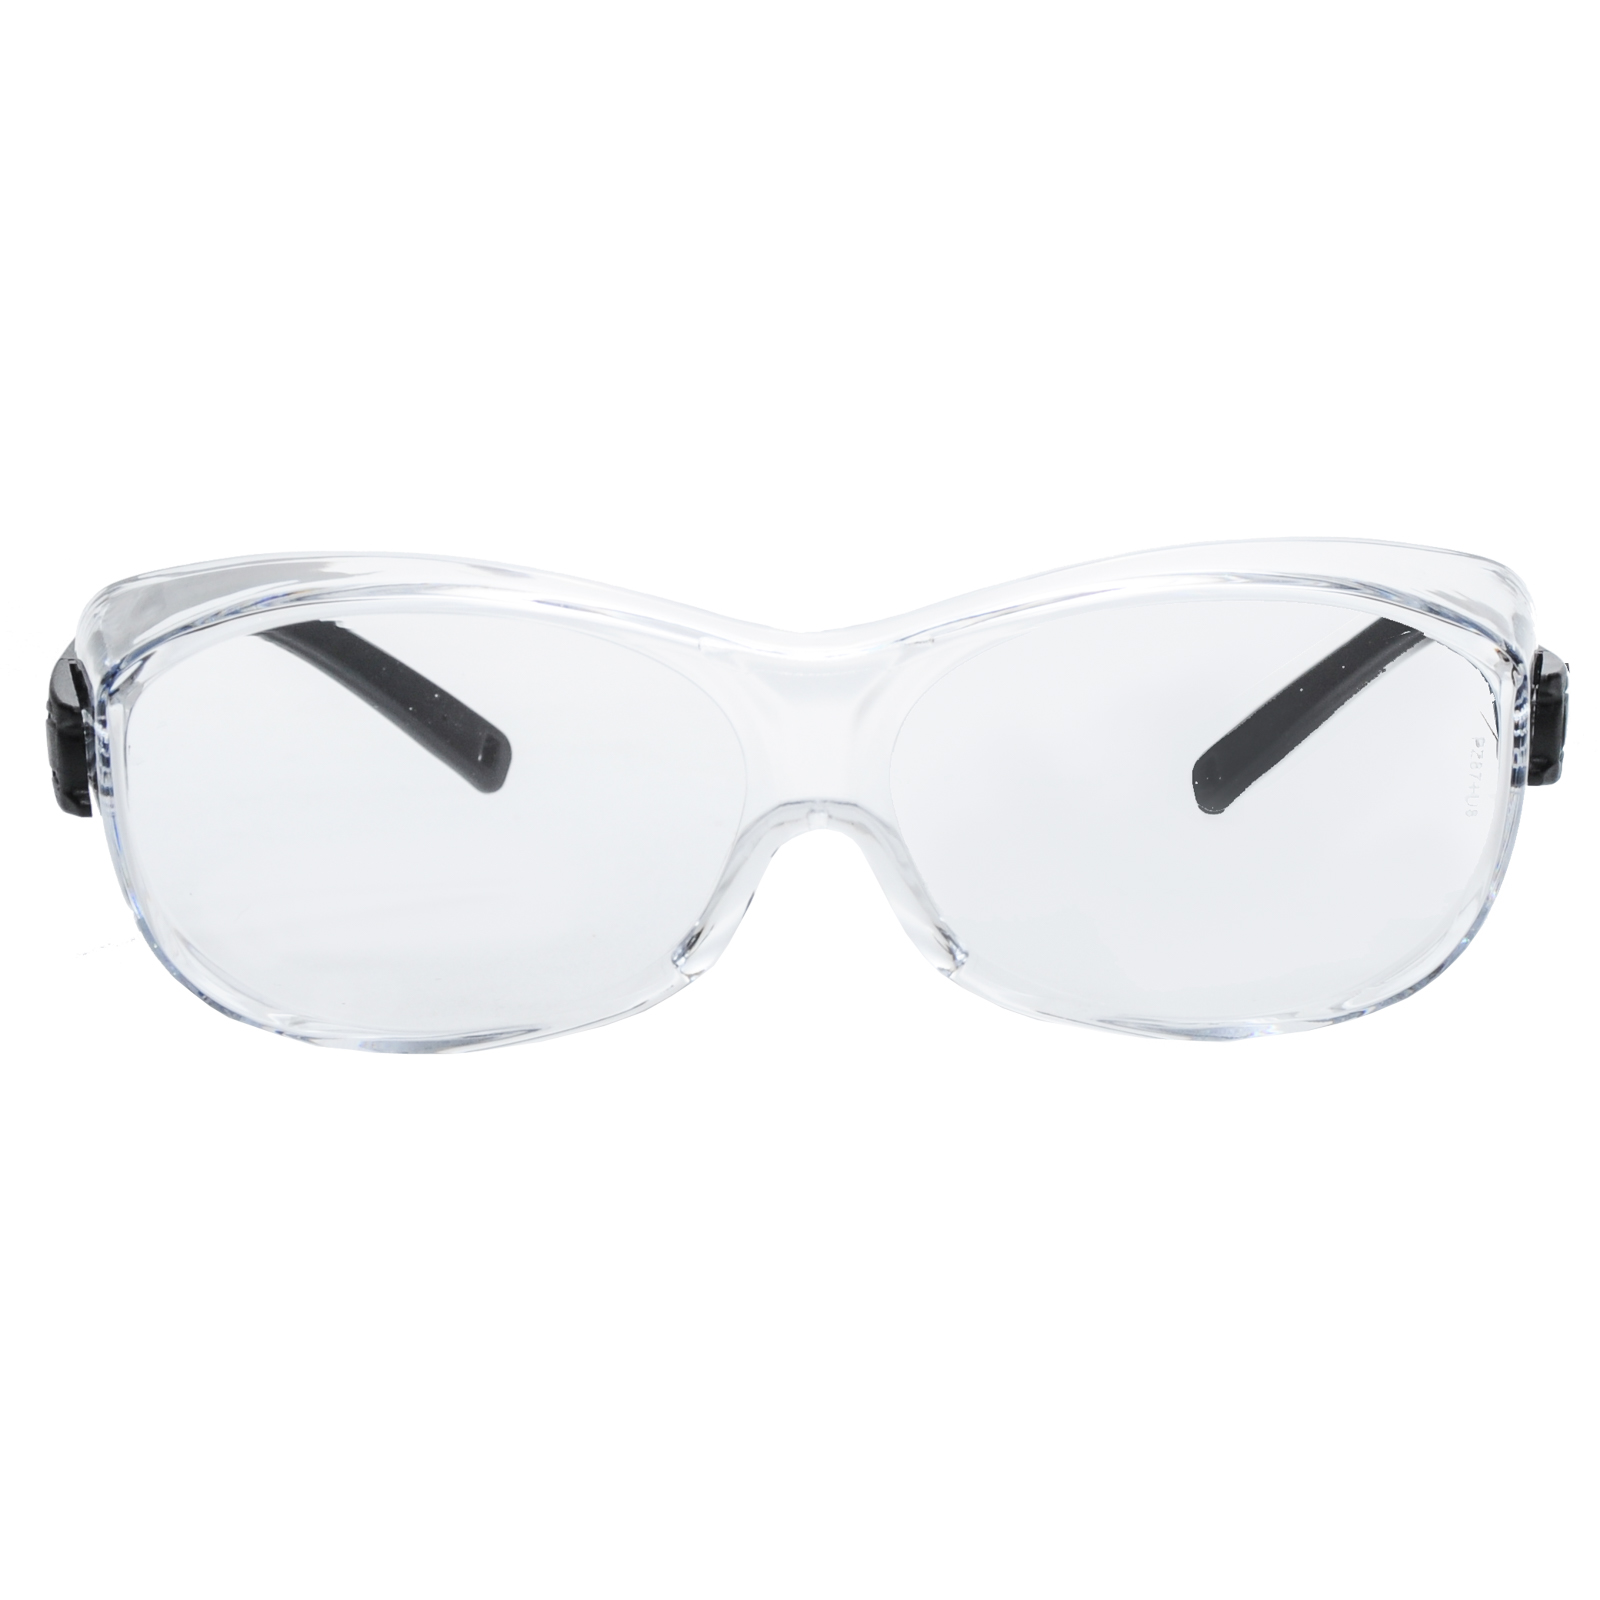 OTS CLEAR SAFETY GLASSES